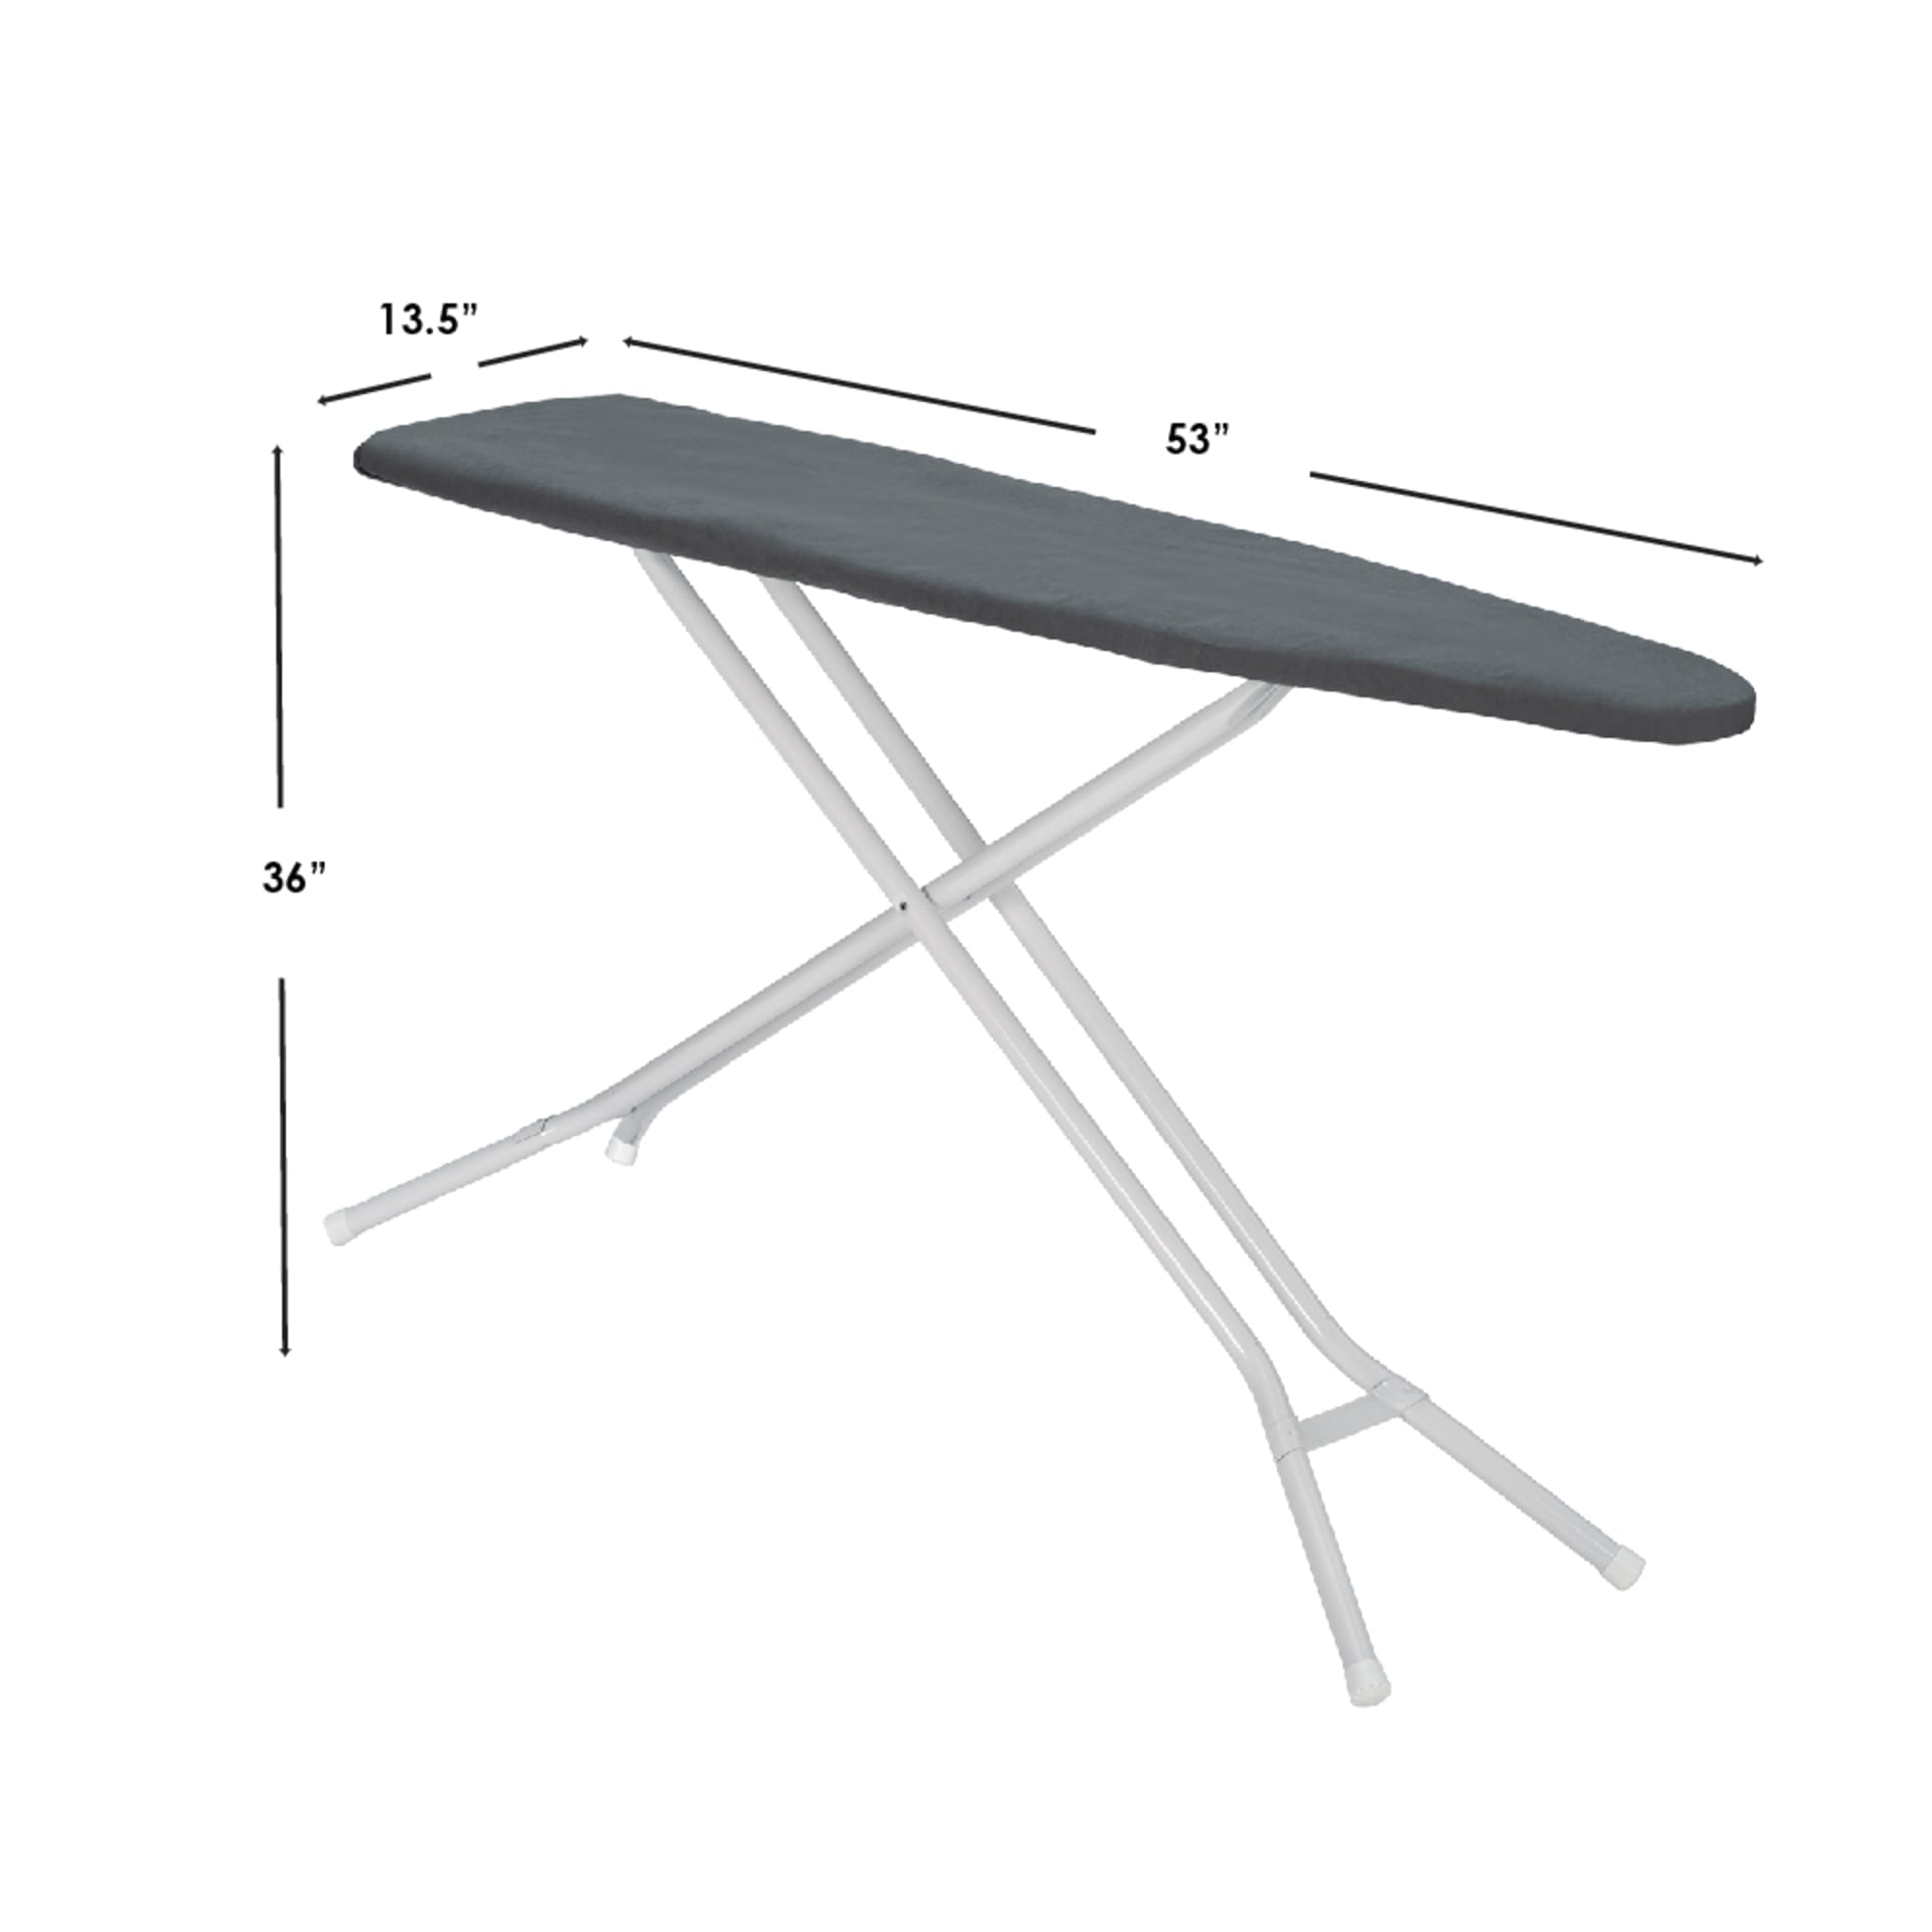 Seymour Home Products Adjustable Height, 4 Leg Ironing Board with Perforated Top, Dark Gray (4 Pack) $30.00 EACH, CASE PACK OF 4